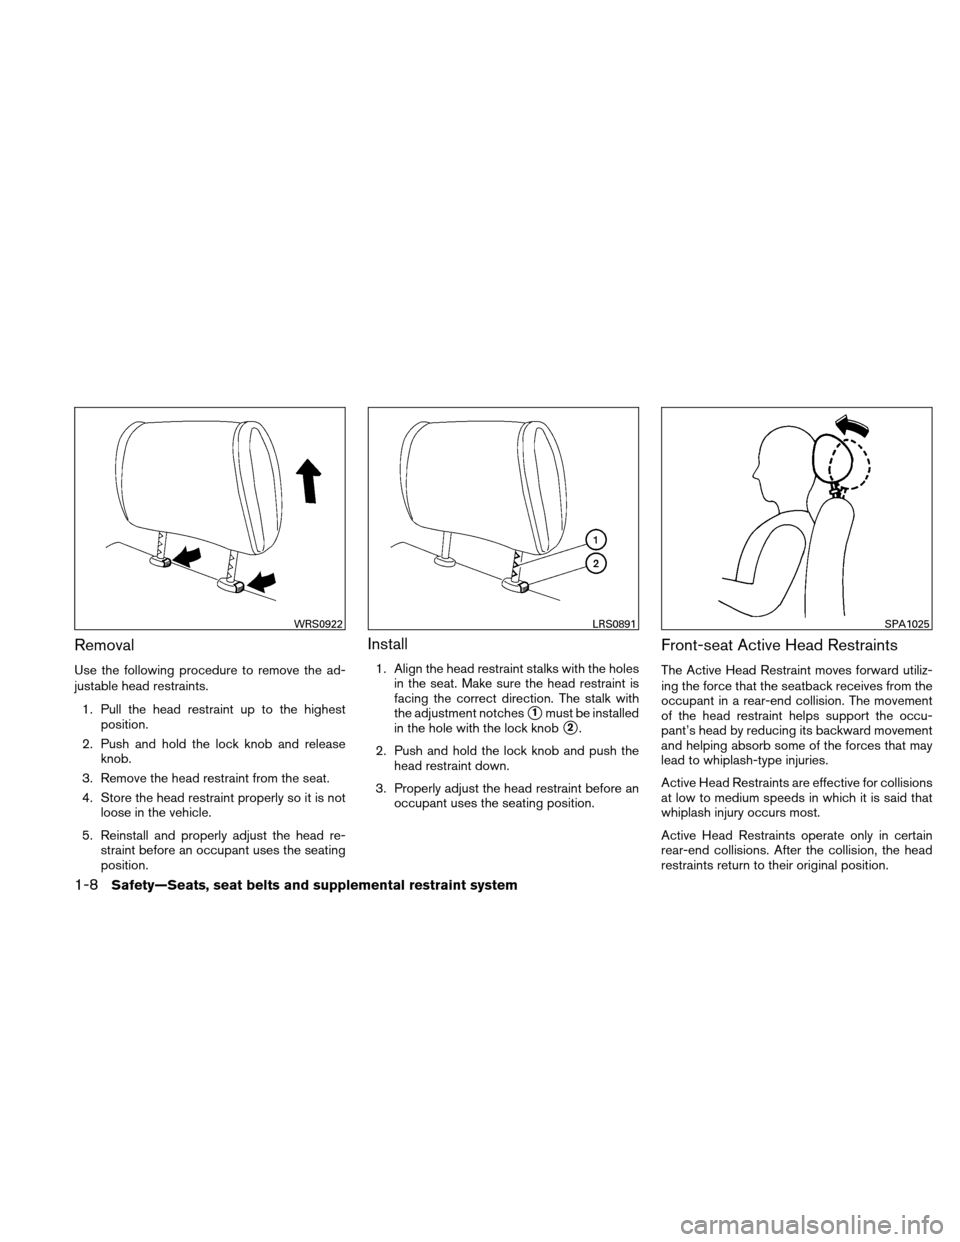 NISSAN ALTIMA HYBRID 2010 L32A / 4.G Owners Manual Removal
Use the following procedure to remove the ad-
justable head restraints.1. Pull the head restraint up to the highest position.
2. Push and hold the lock knob and release knob.
3. Remove the hea